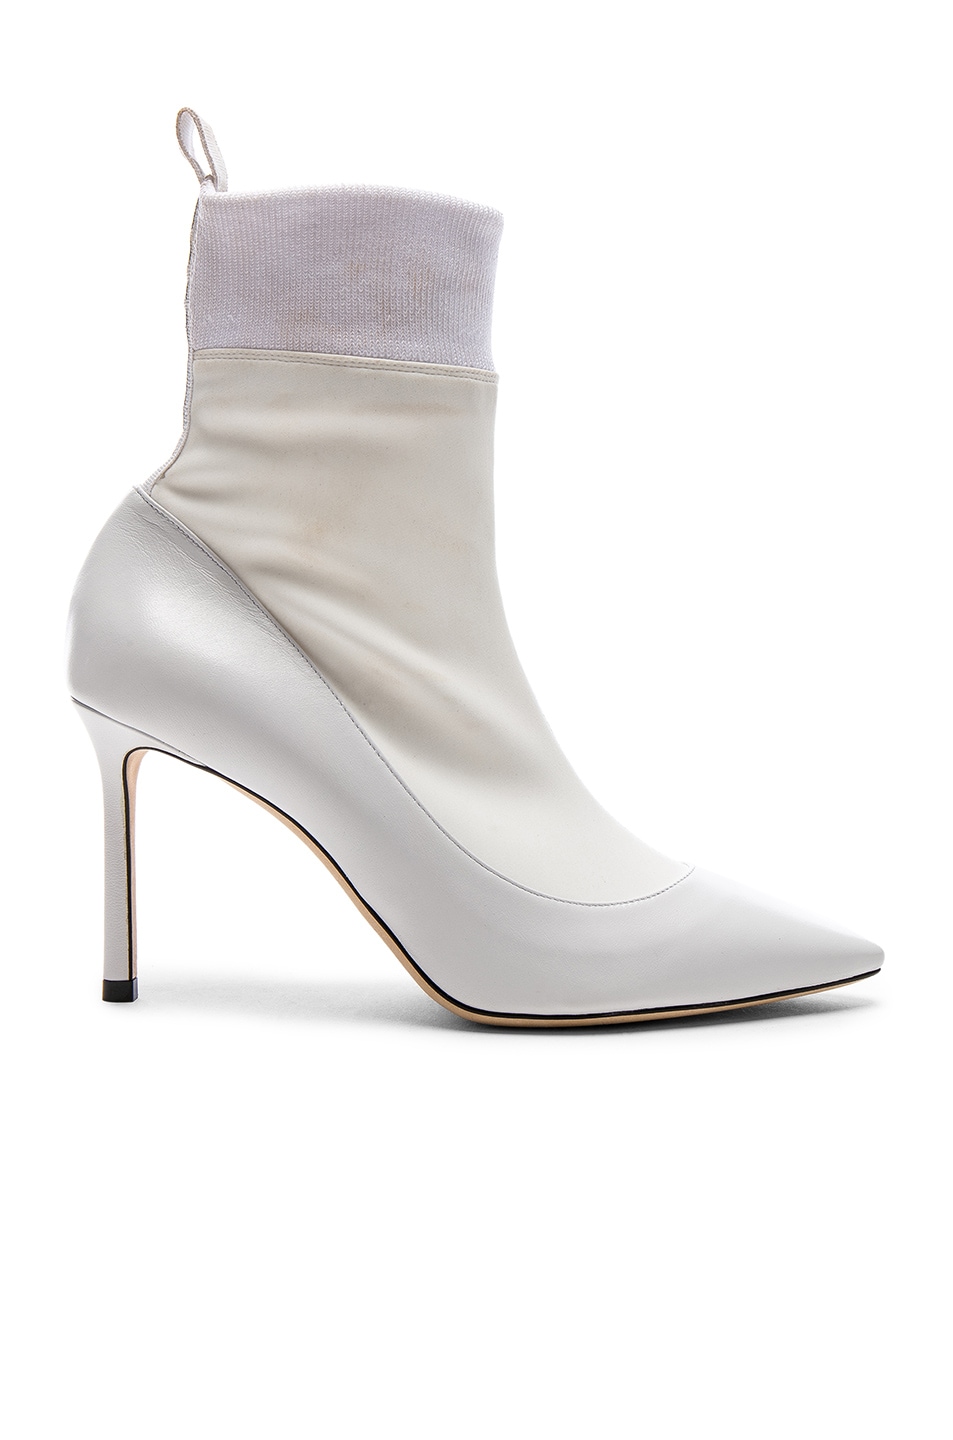 Image 1 of Jimmy Choo Brandon 85 Leather Boots in White